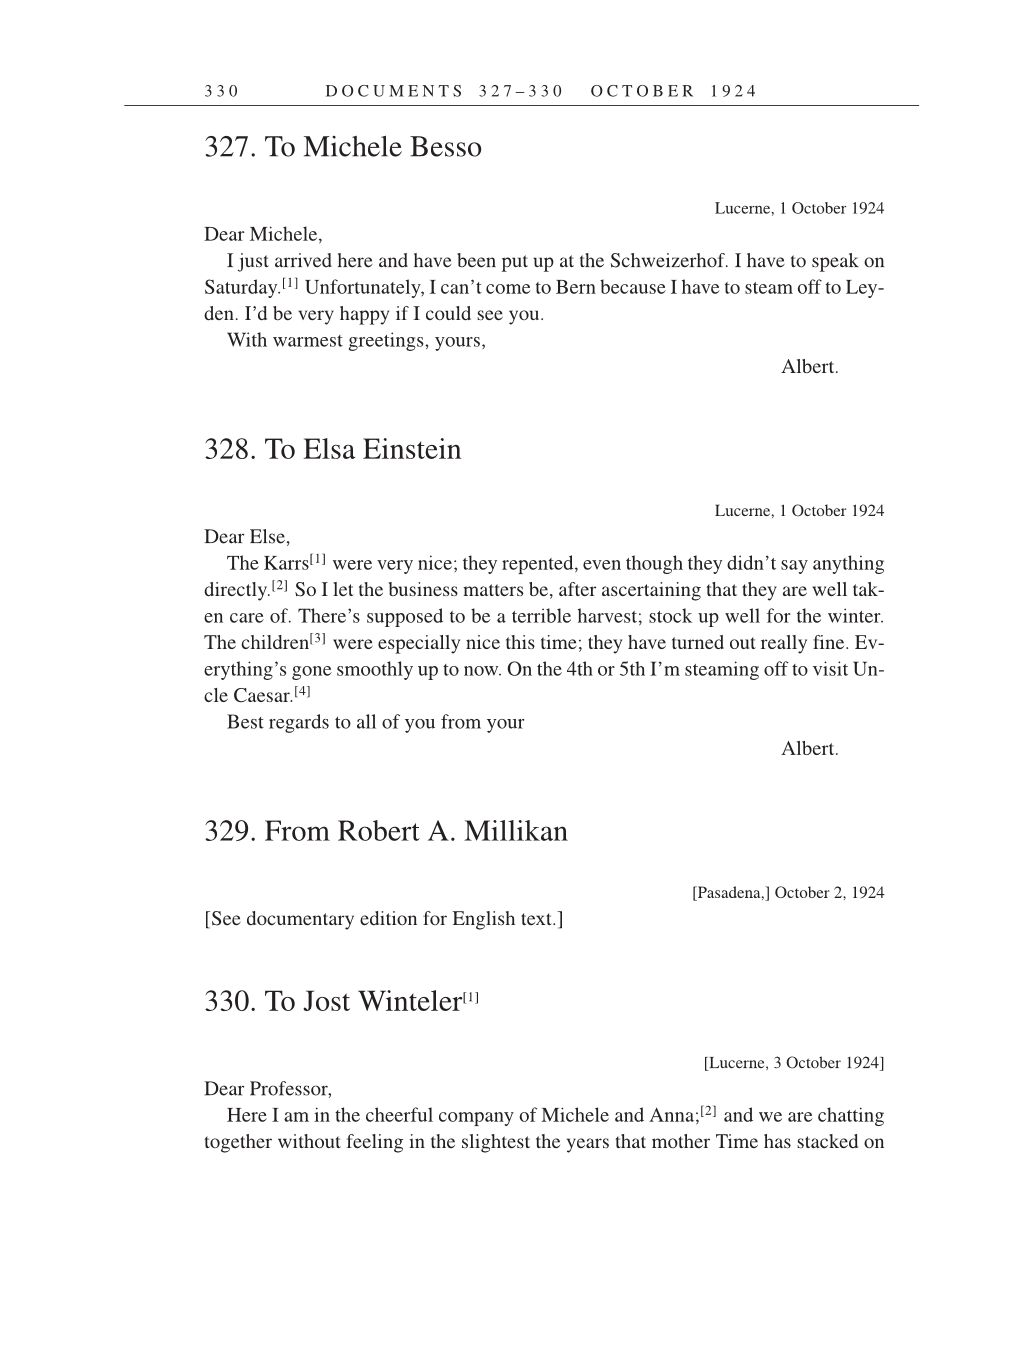 Volume 14: The Berlin Years: Writings & Correspondence, April 1923-May 1925 (English Translation Supplement) page 330